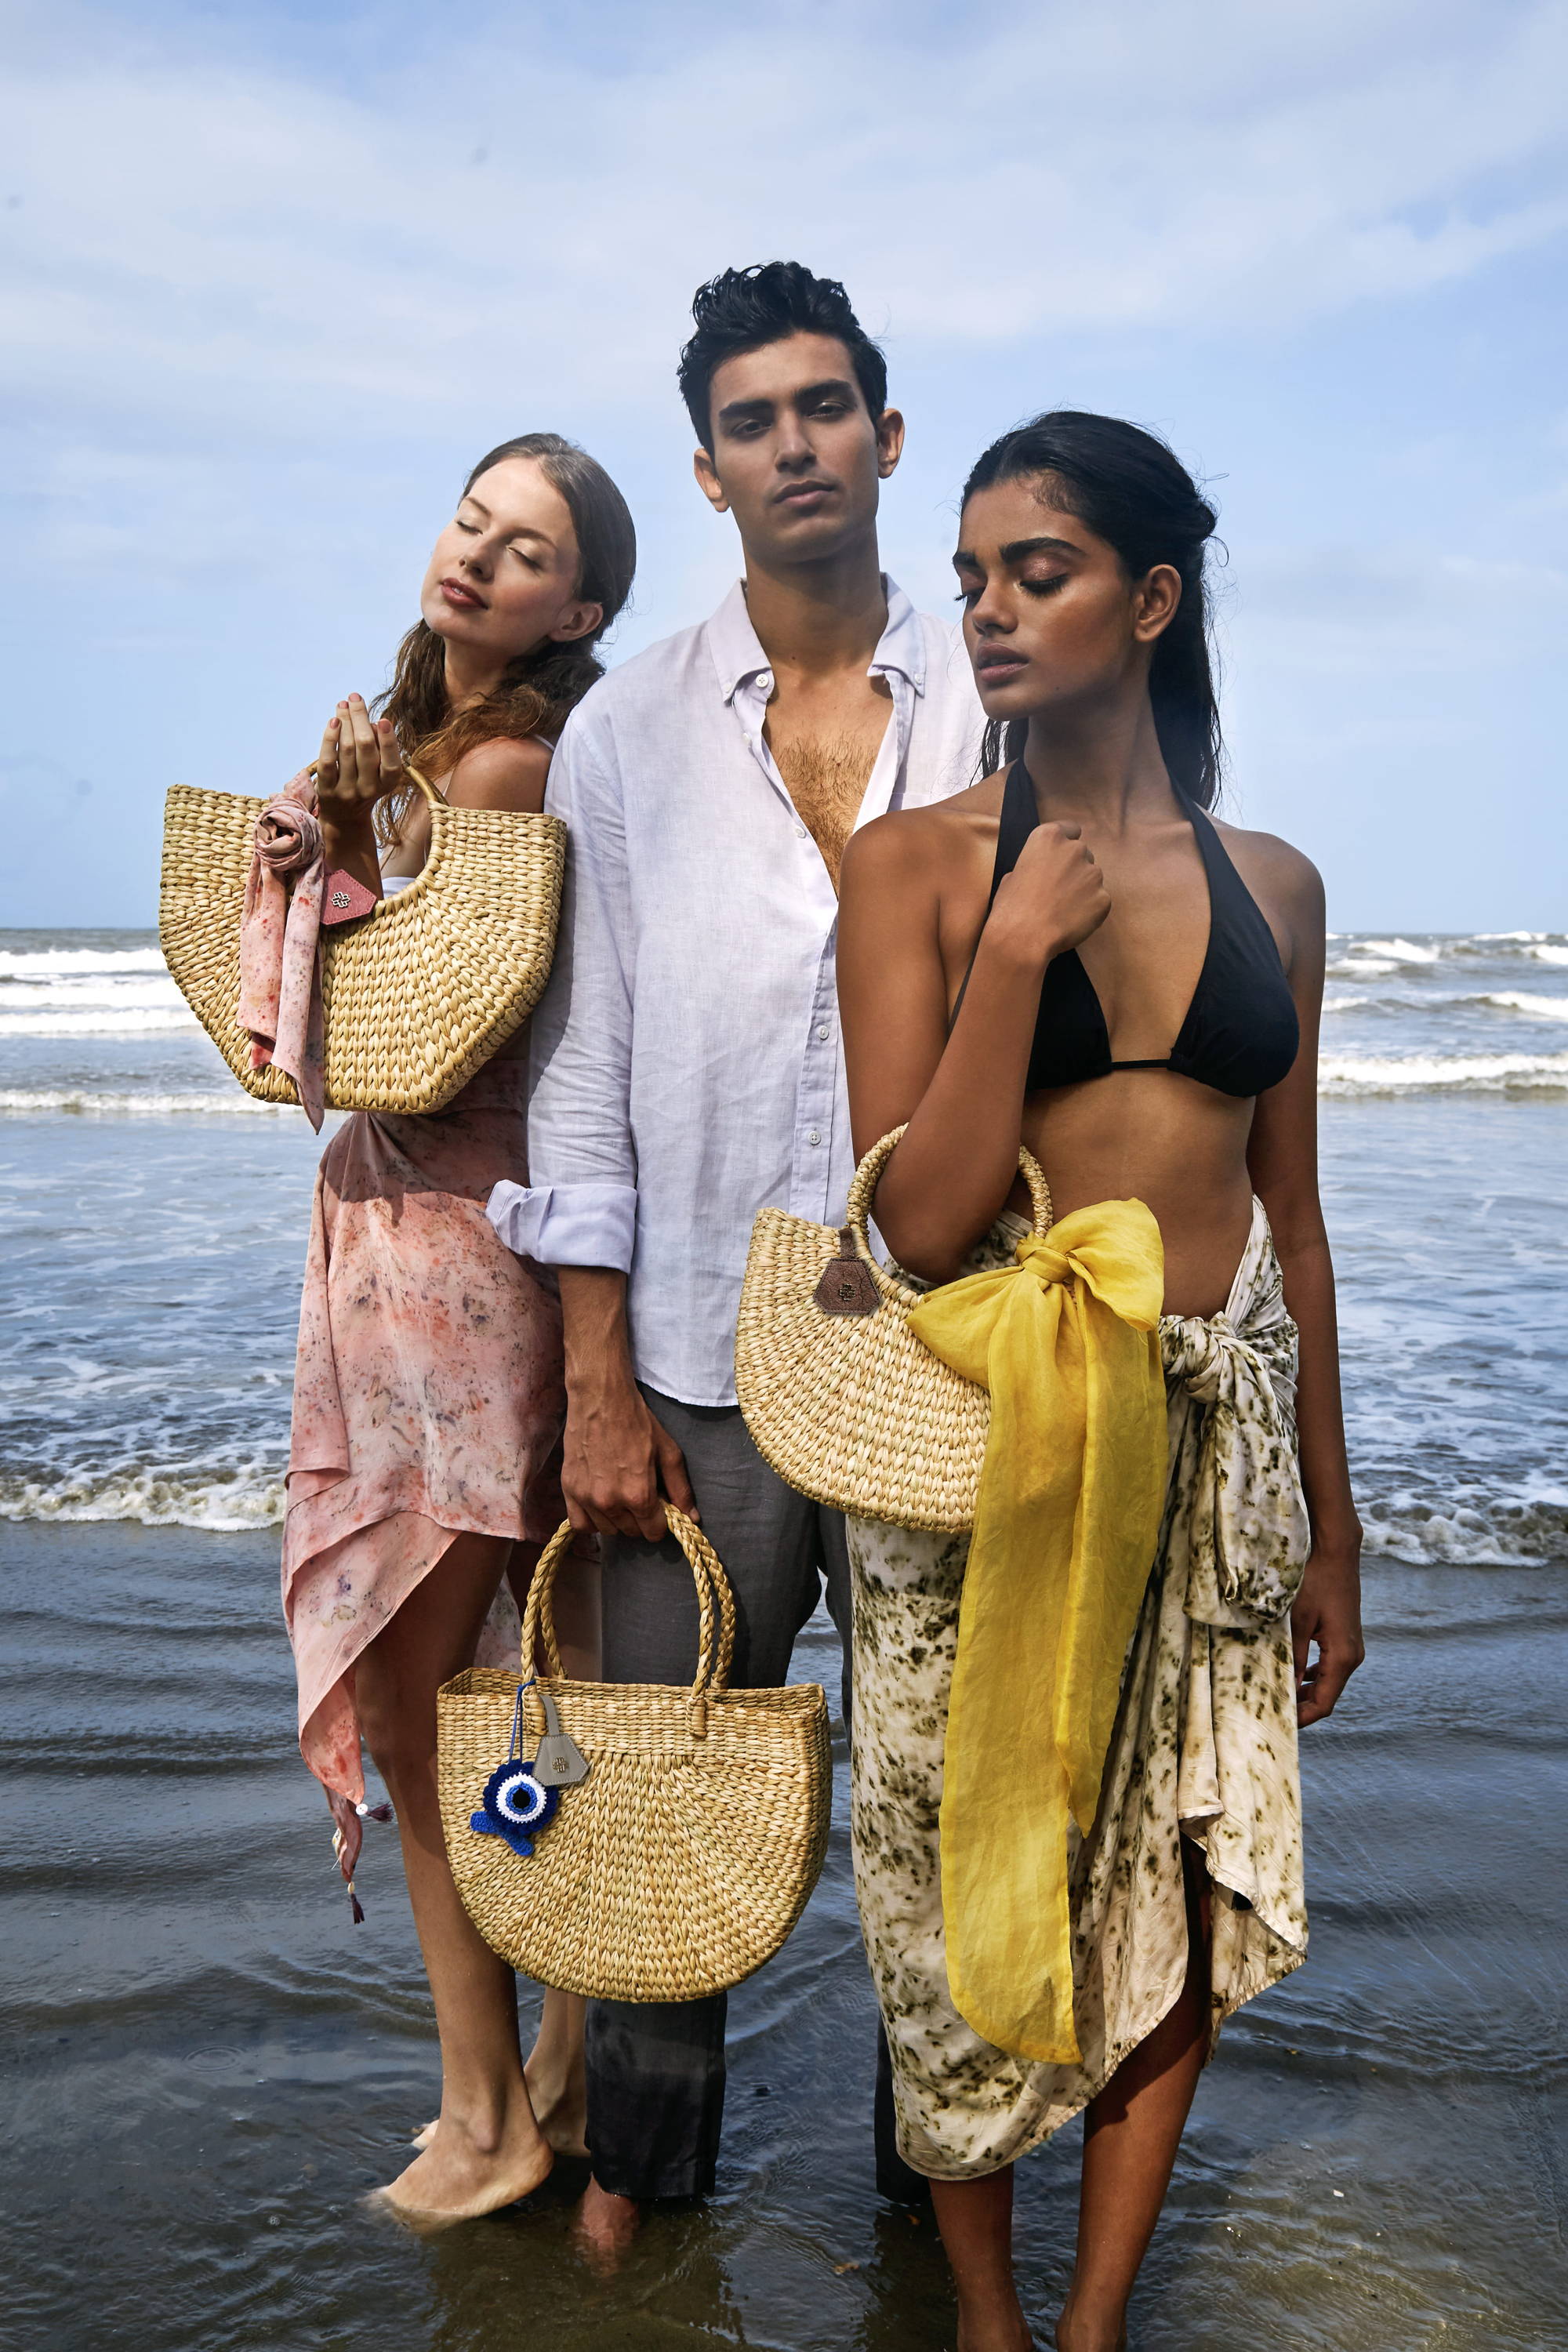 MAYU is a sustainable luxury brand that produces fish leather accessories by upcycling discarded fish skins.